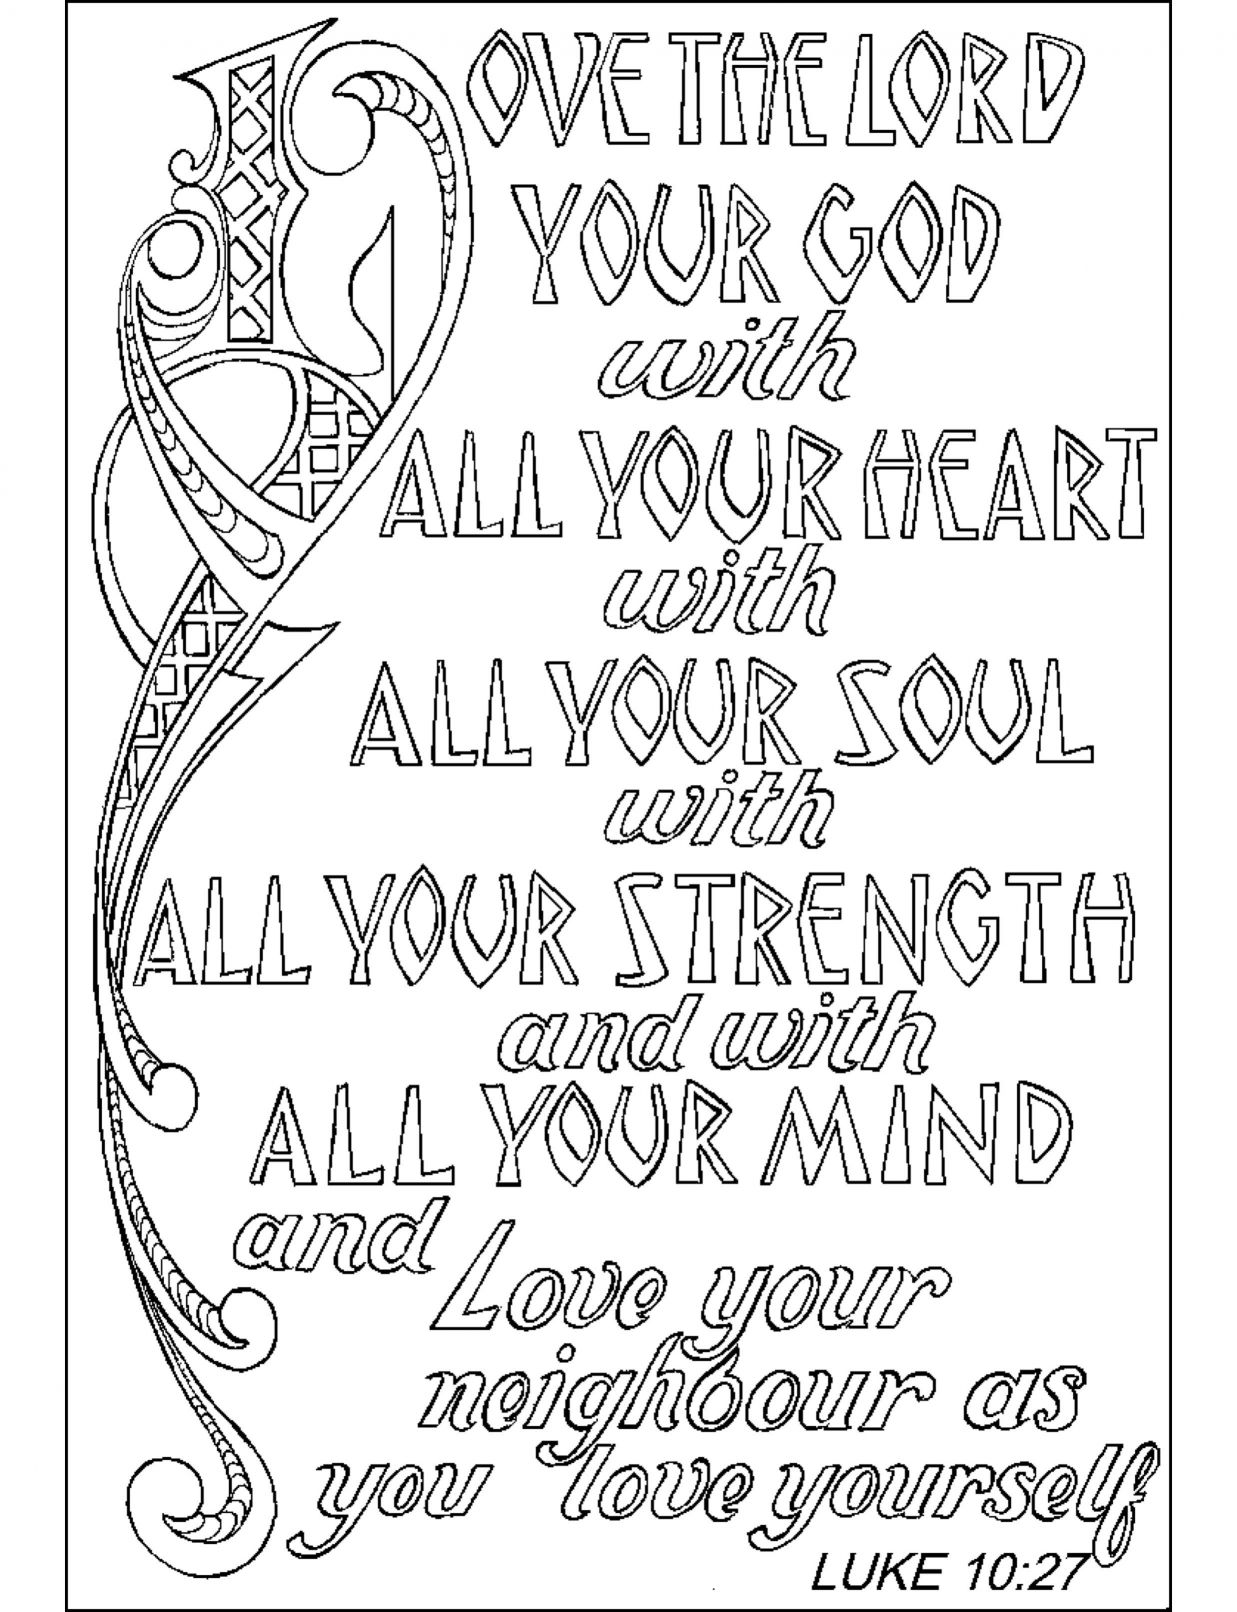 Biblical Coloring Pages - Coloring Pages Designs